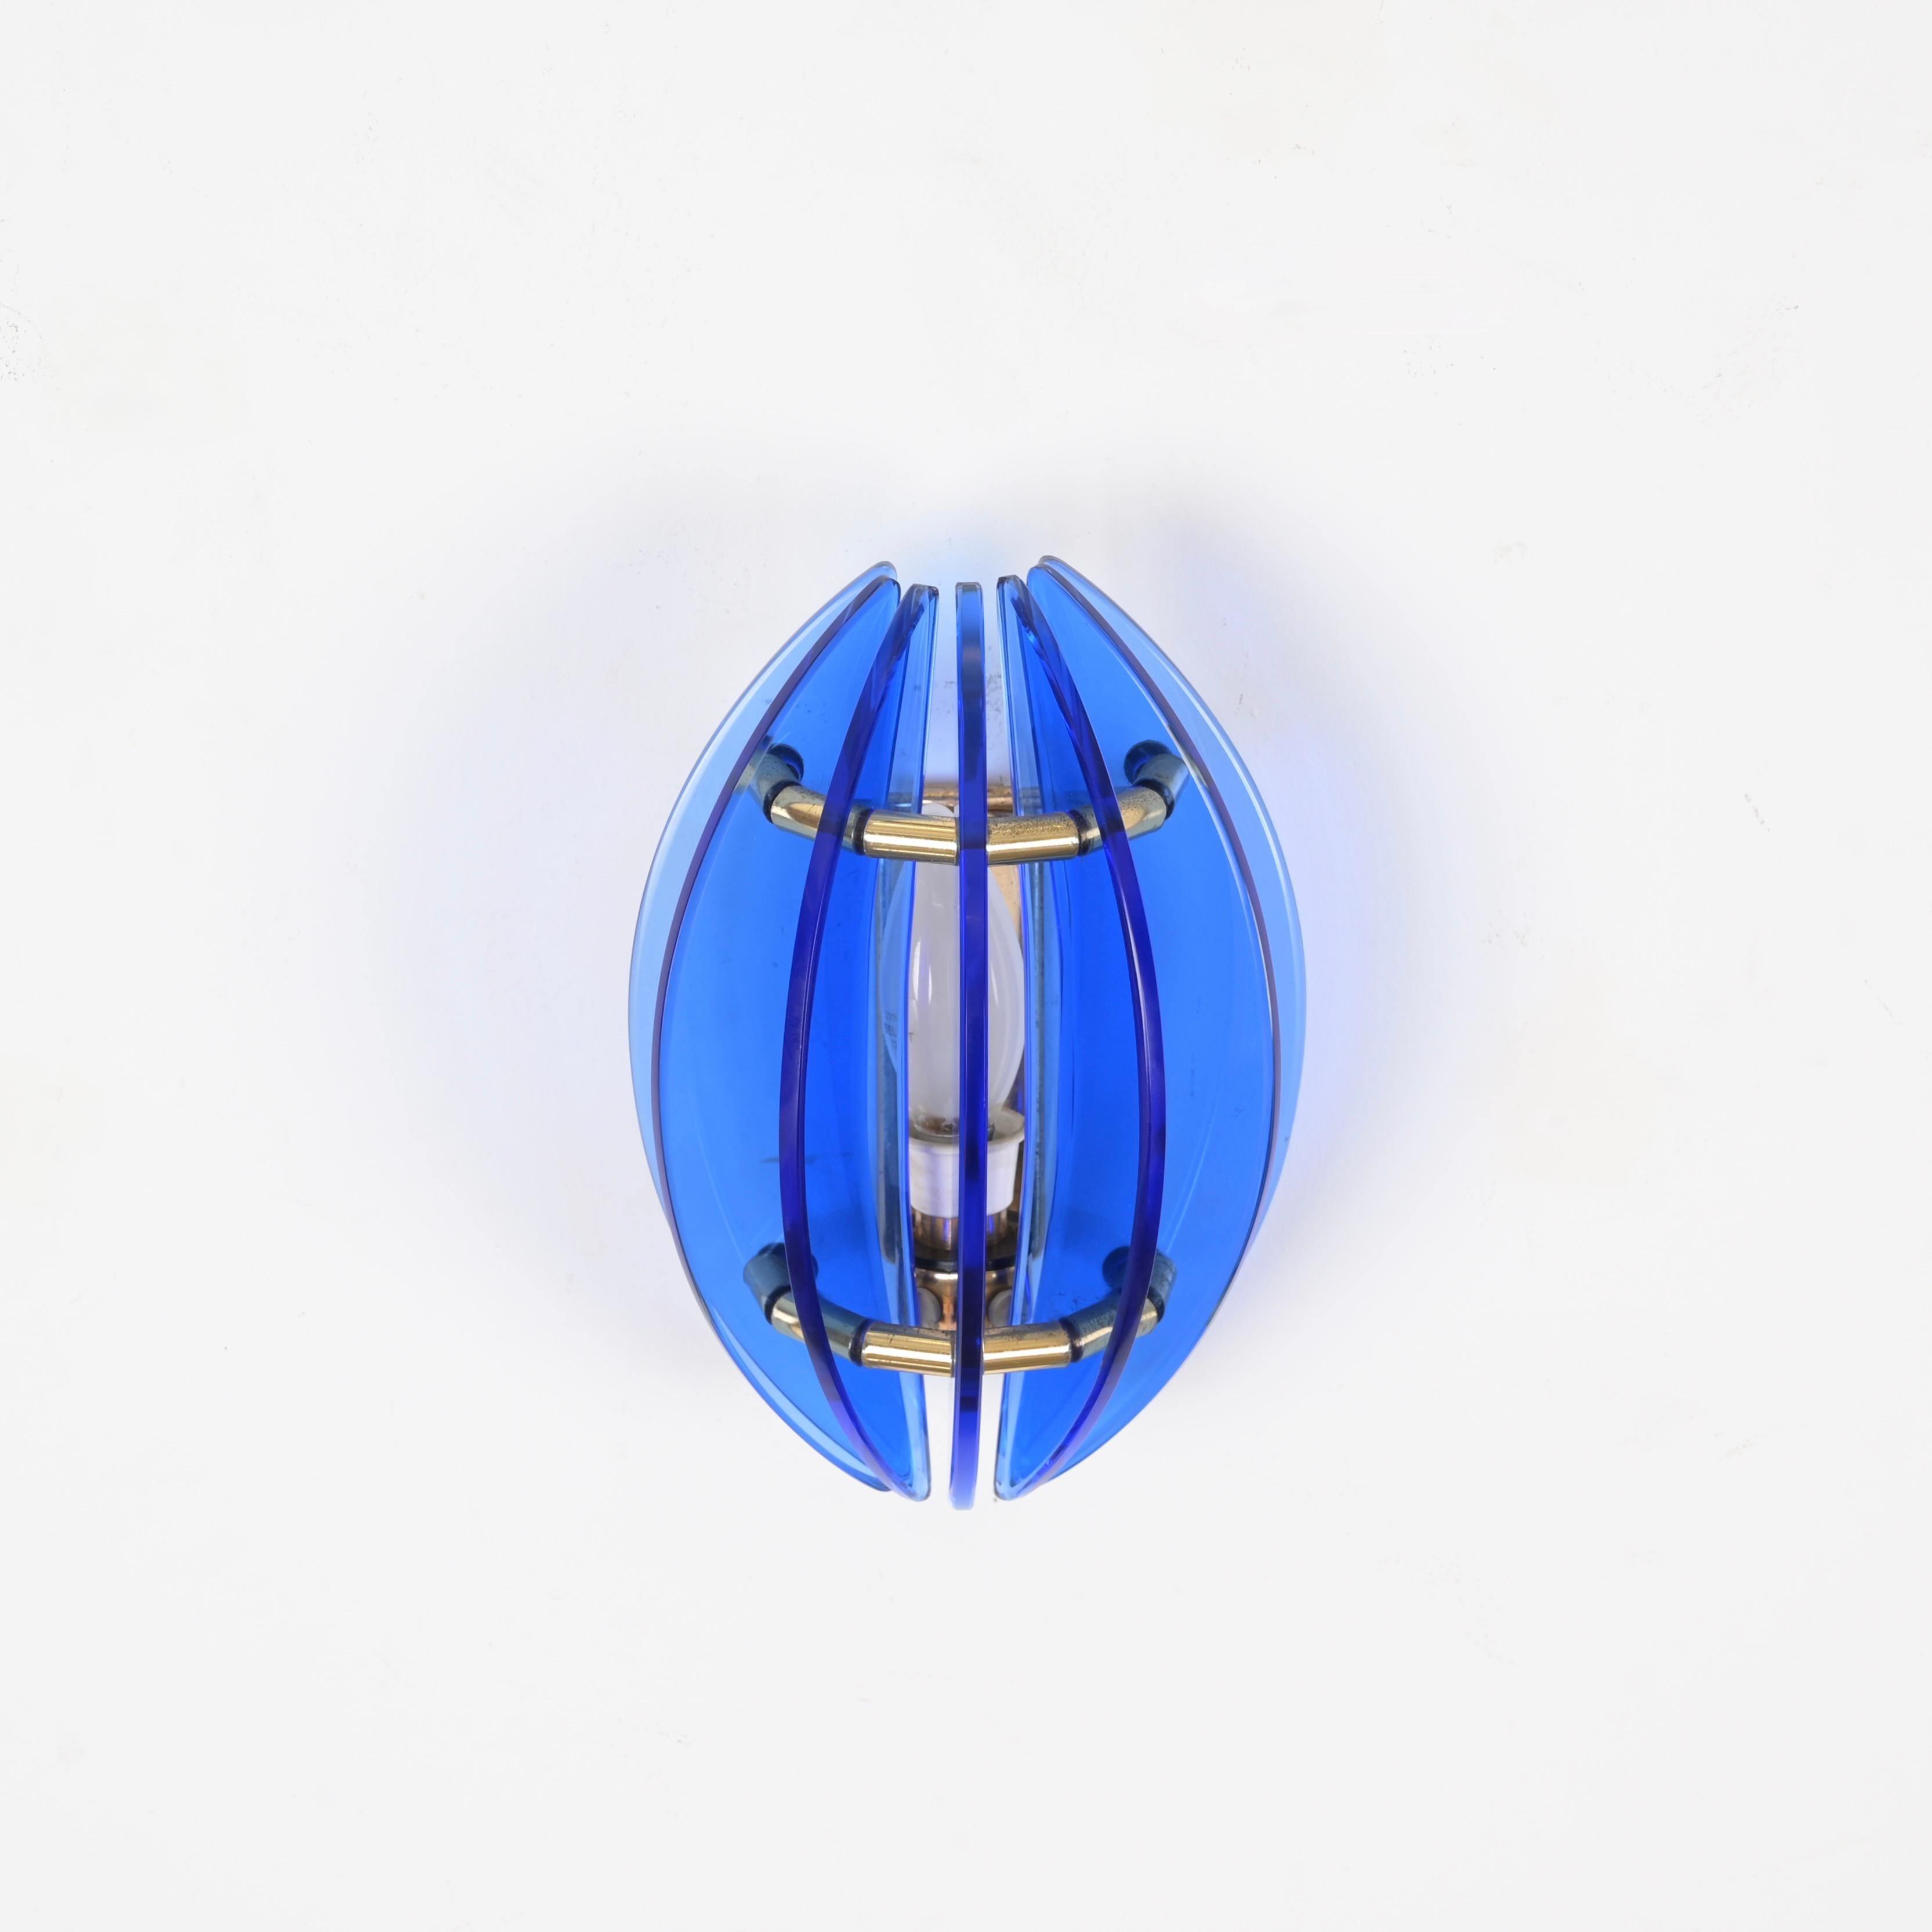 Italian Brass and Murano Blue Glass Wall Sconce by Galvorame, Italy Lighting, 1970s For Sale